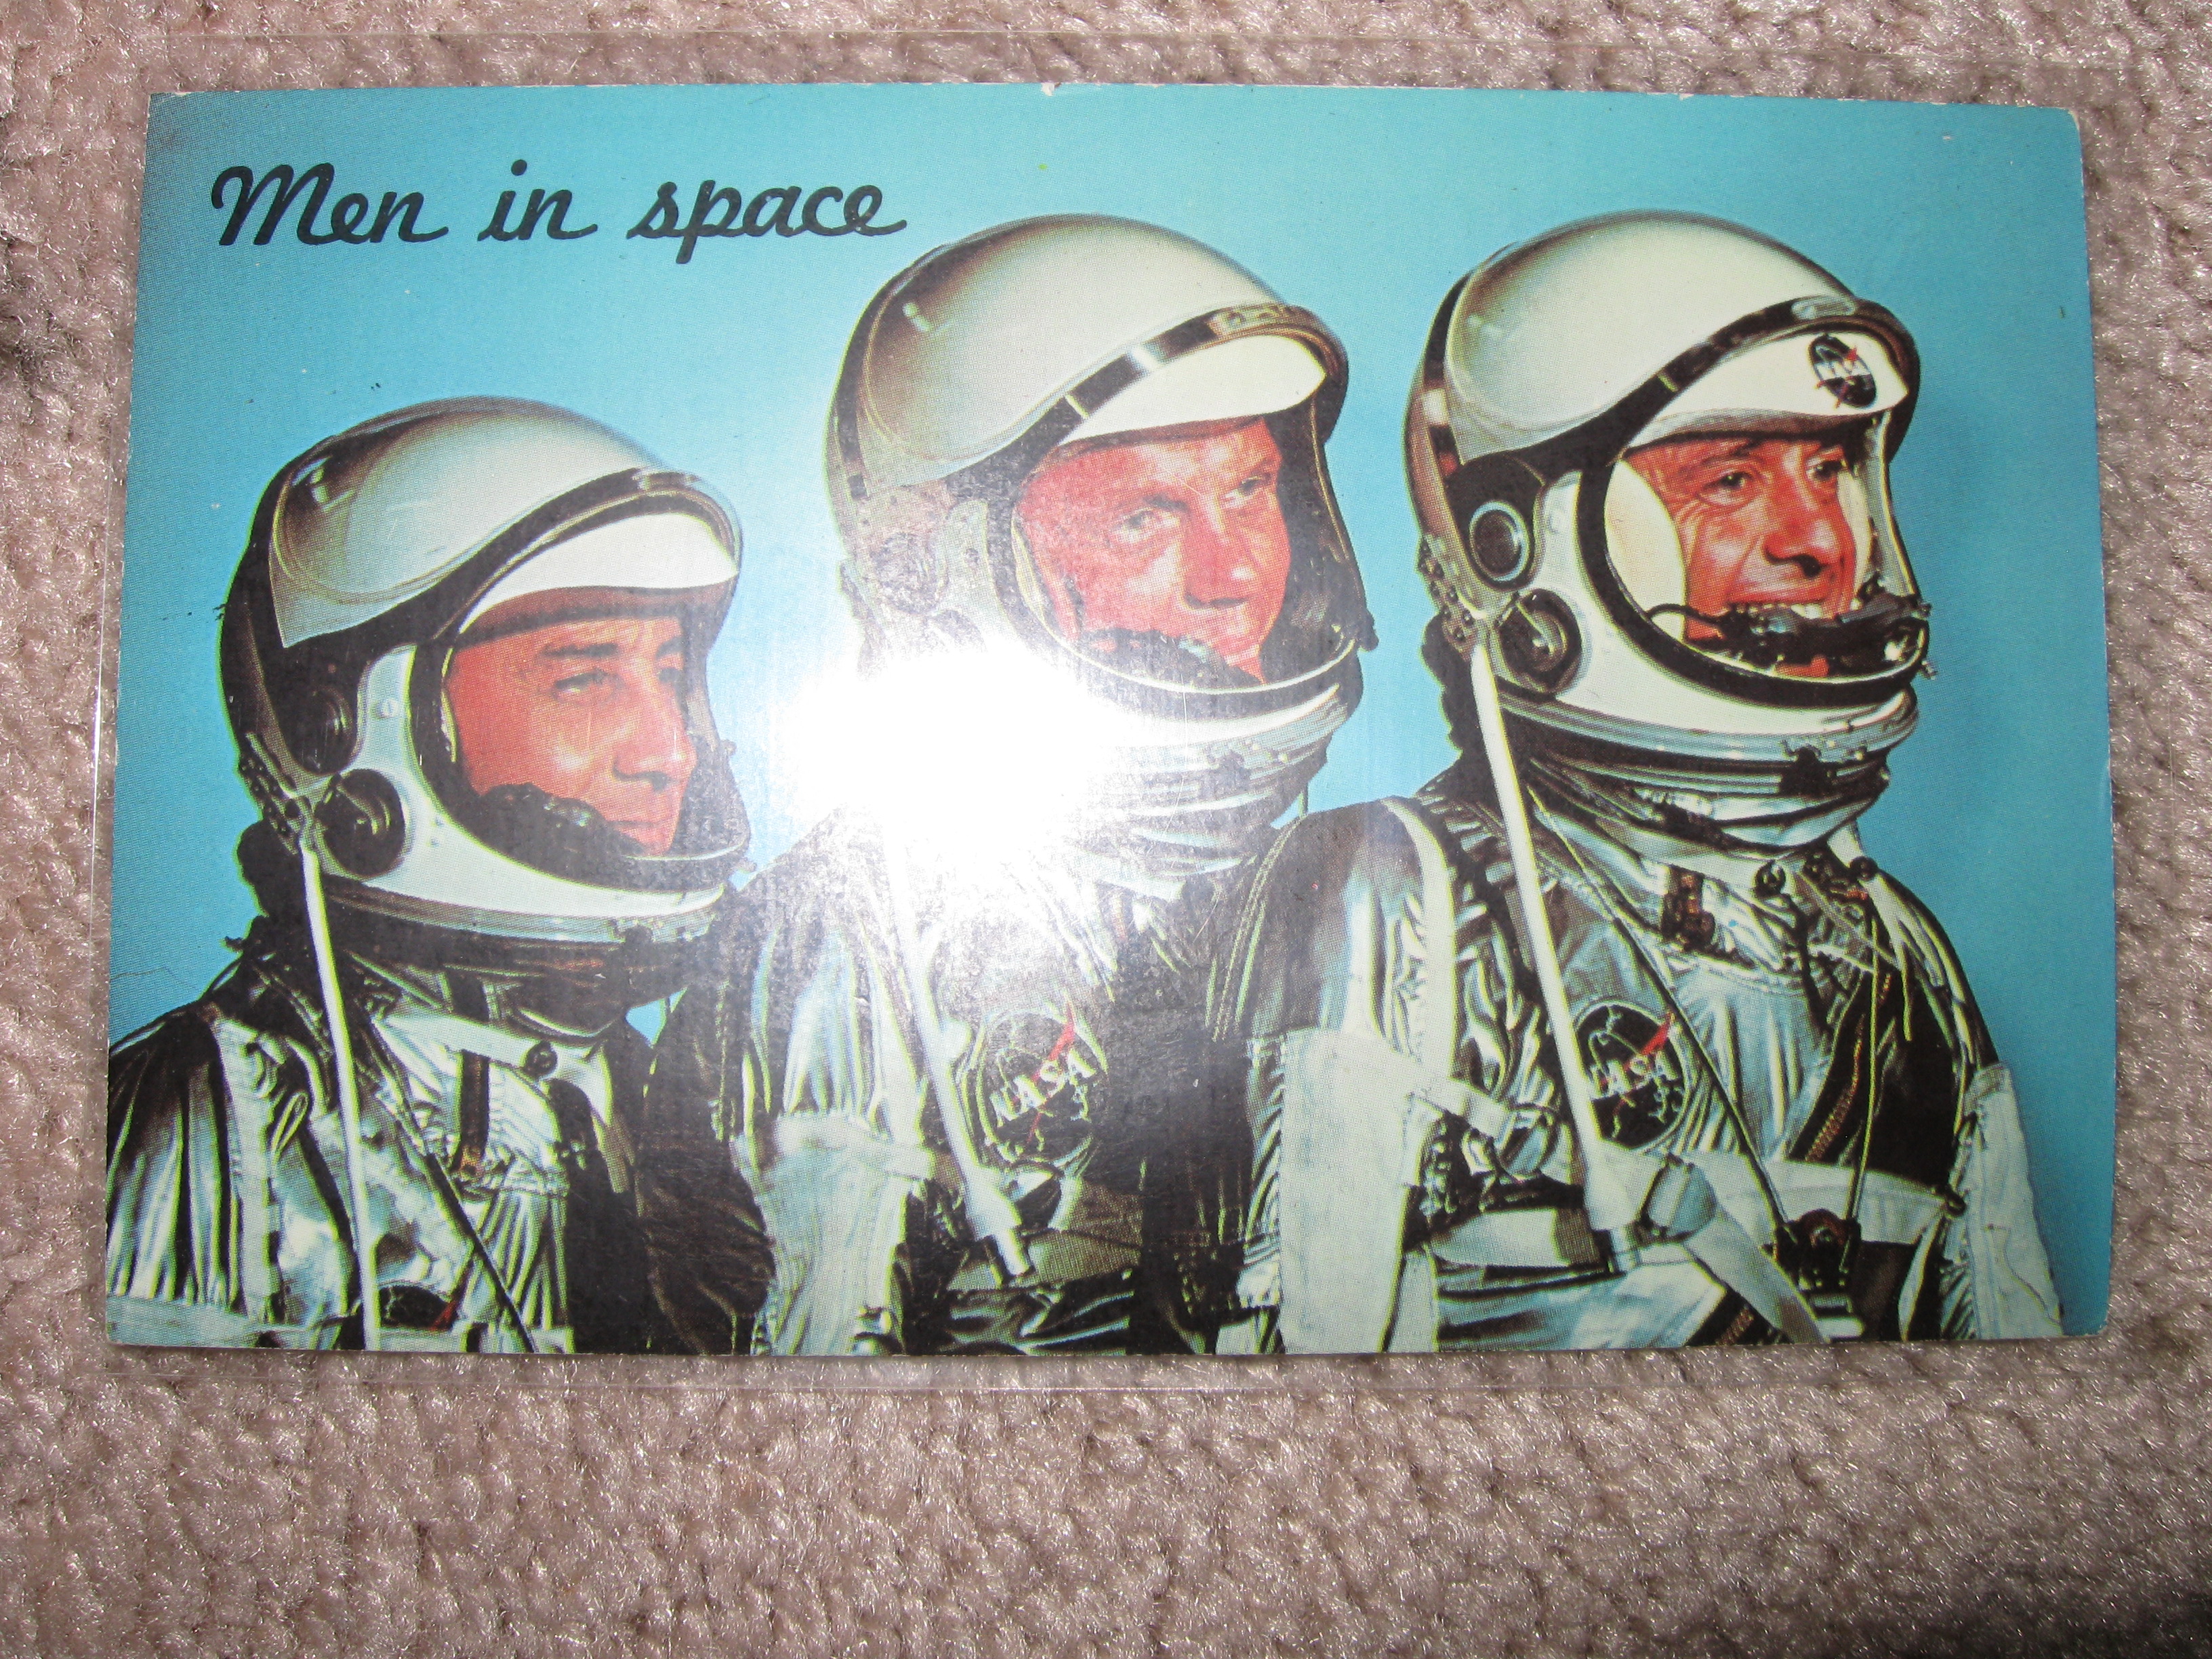 Men in space " A trip into outer space "